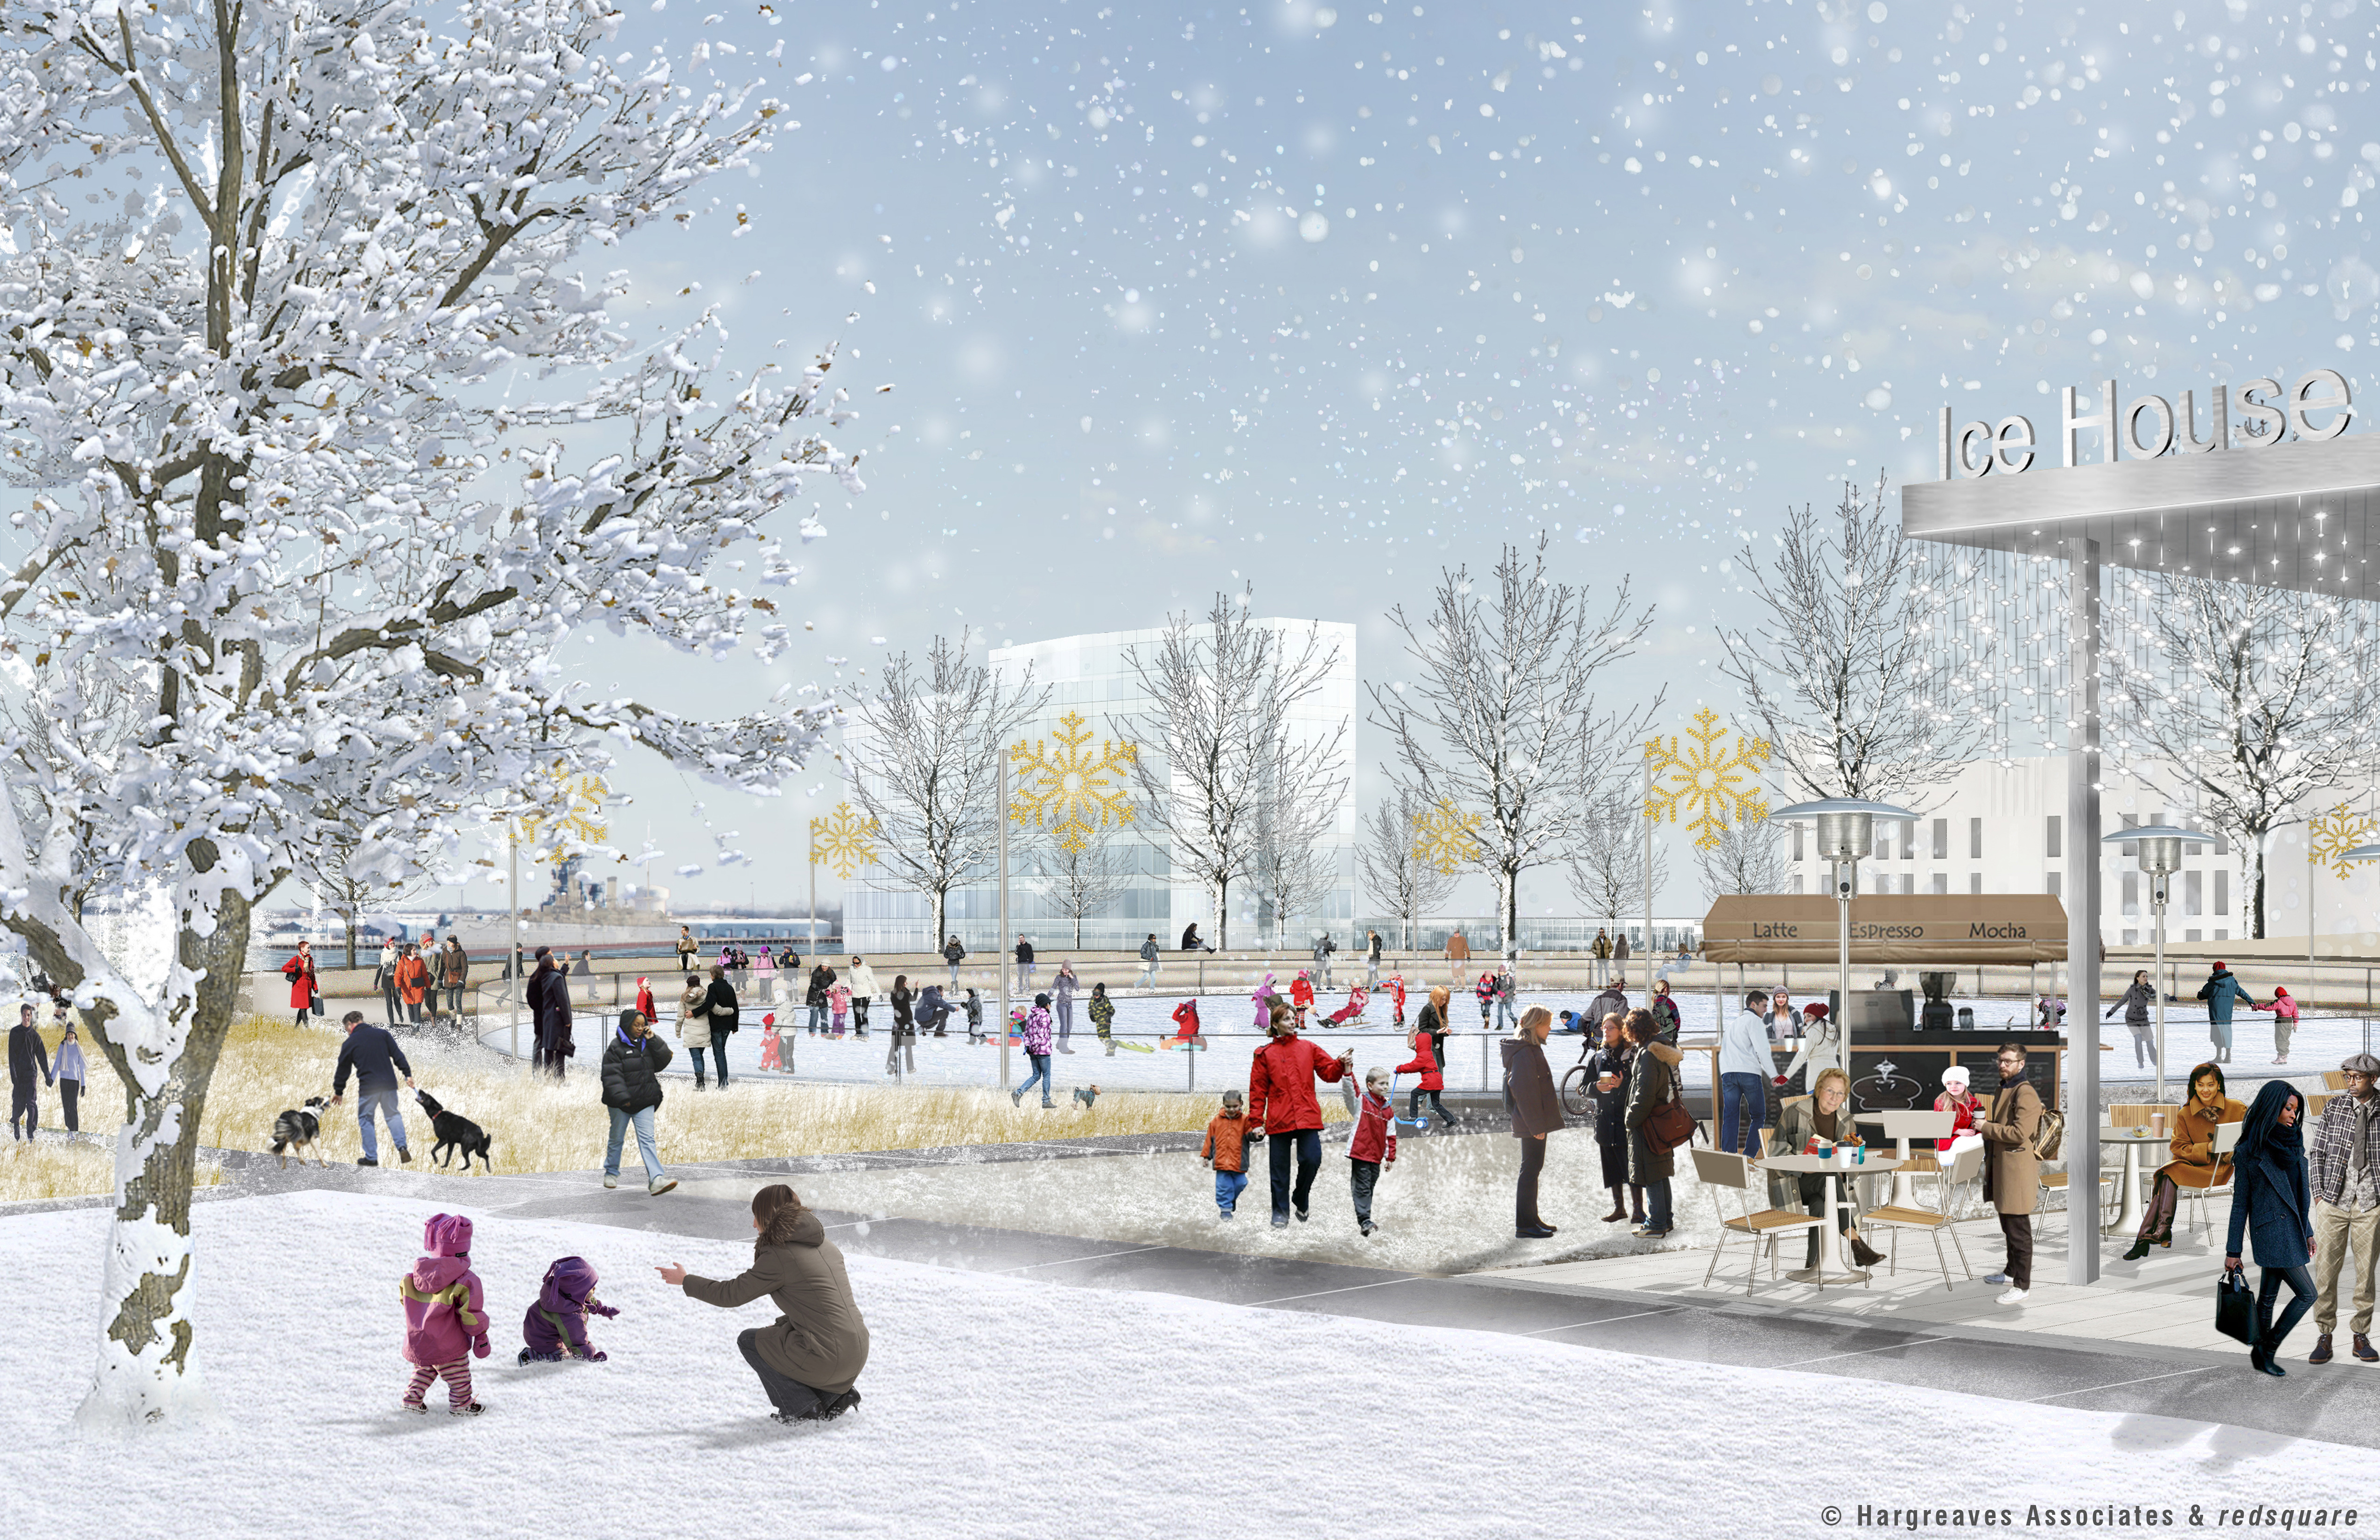 Penn's Landing Park in winter with ice rink, © Hargreaves Associates & redsquare